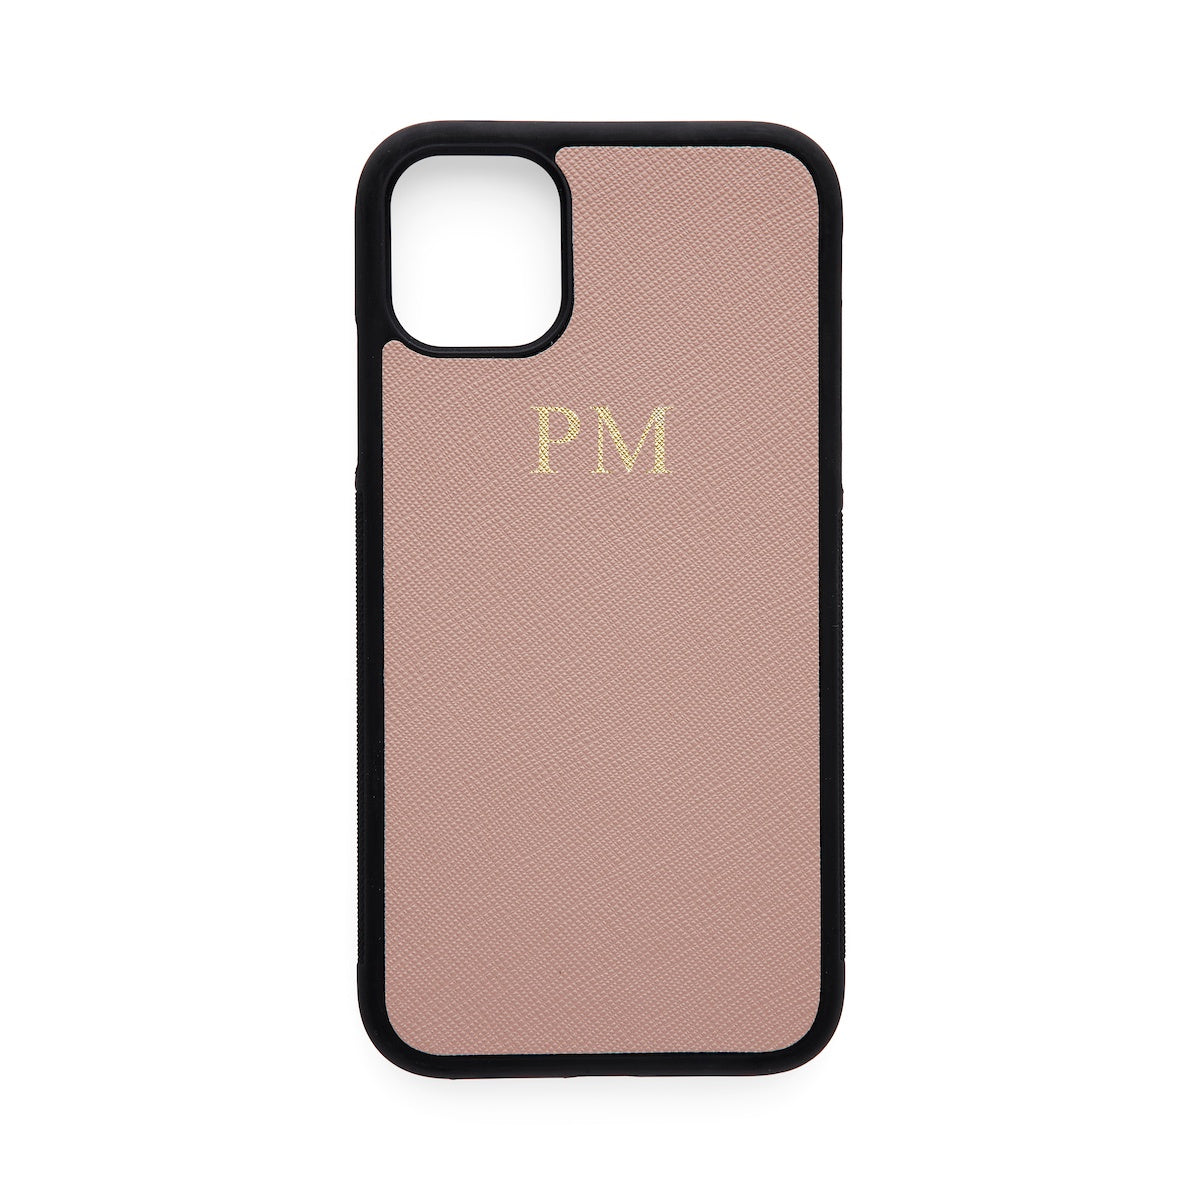 iPhone 11 Pro Max Case - Taupe